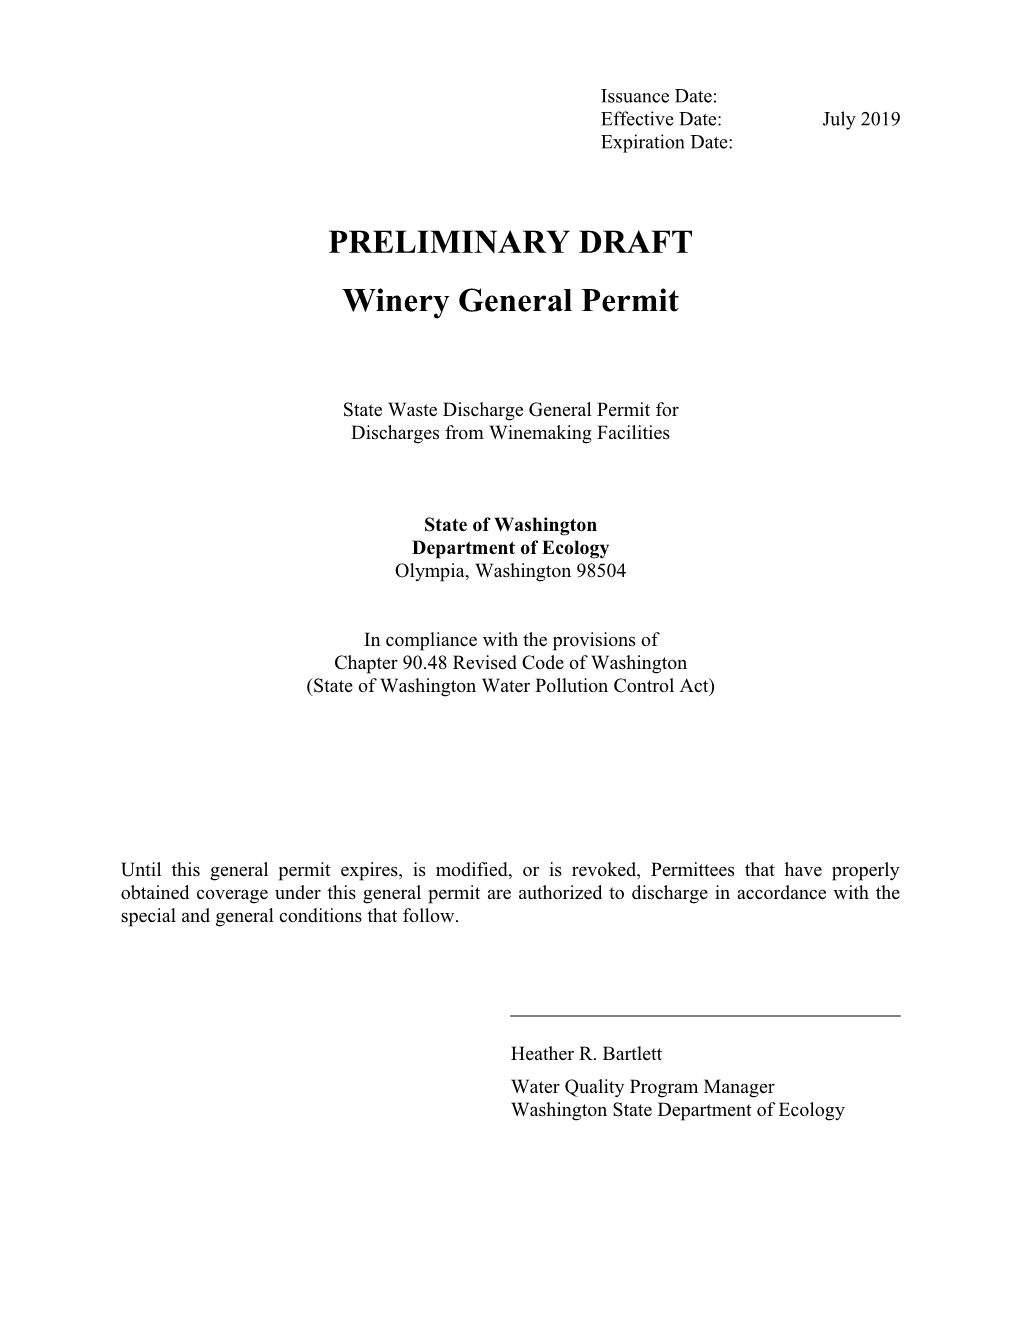 Winery General Permit (Preliminary Draft)